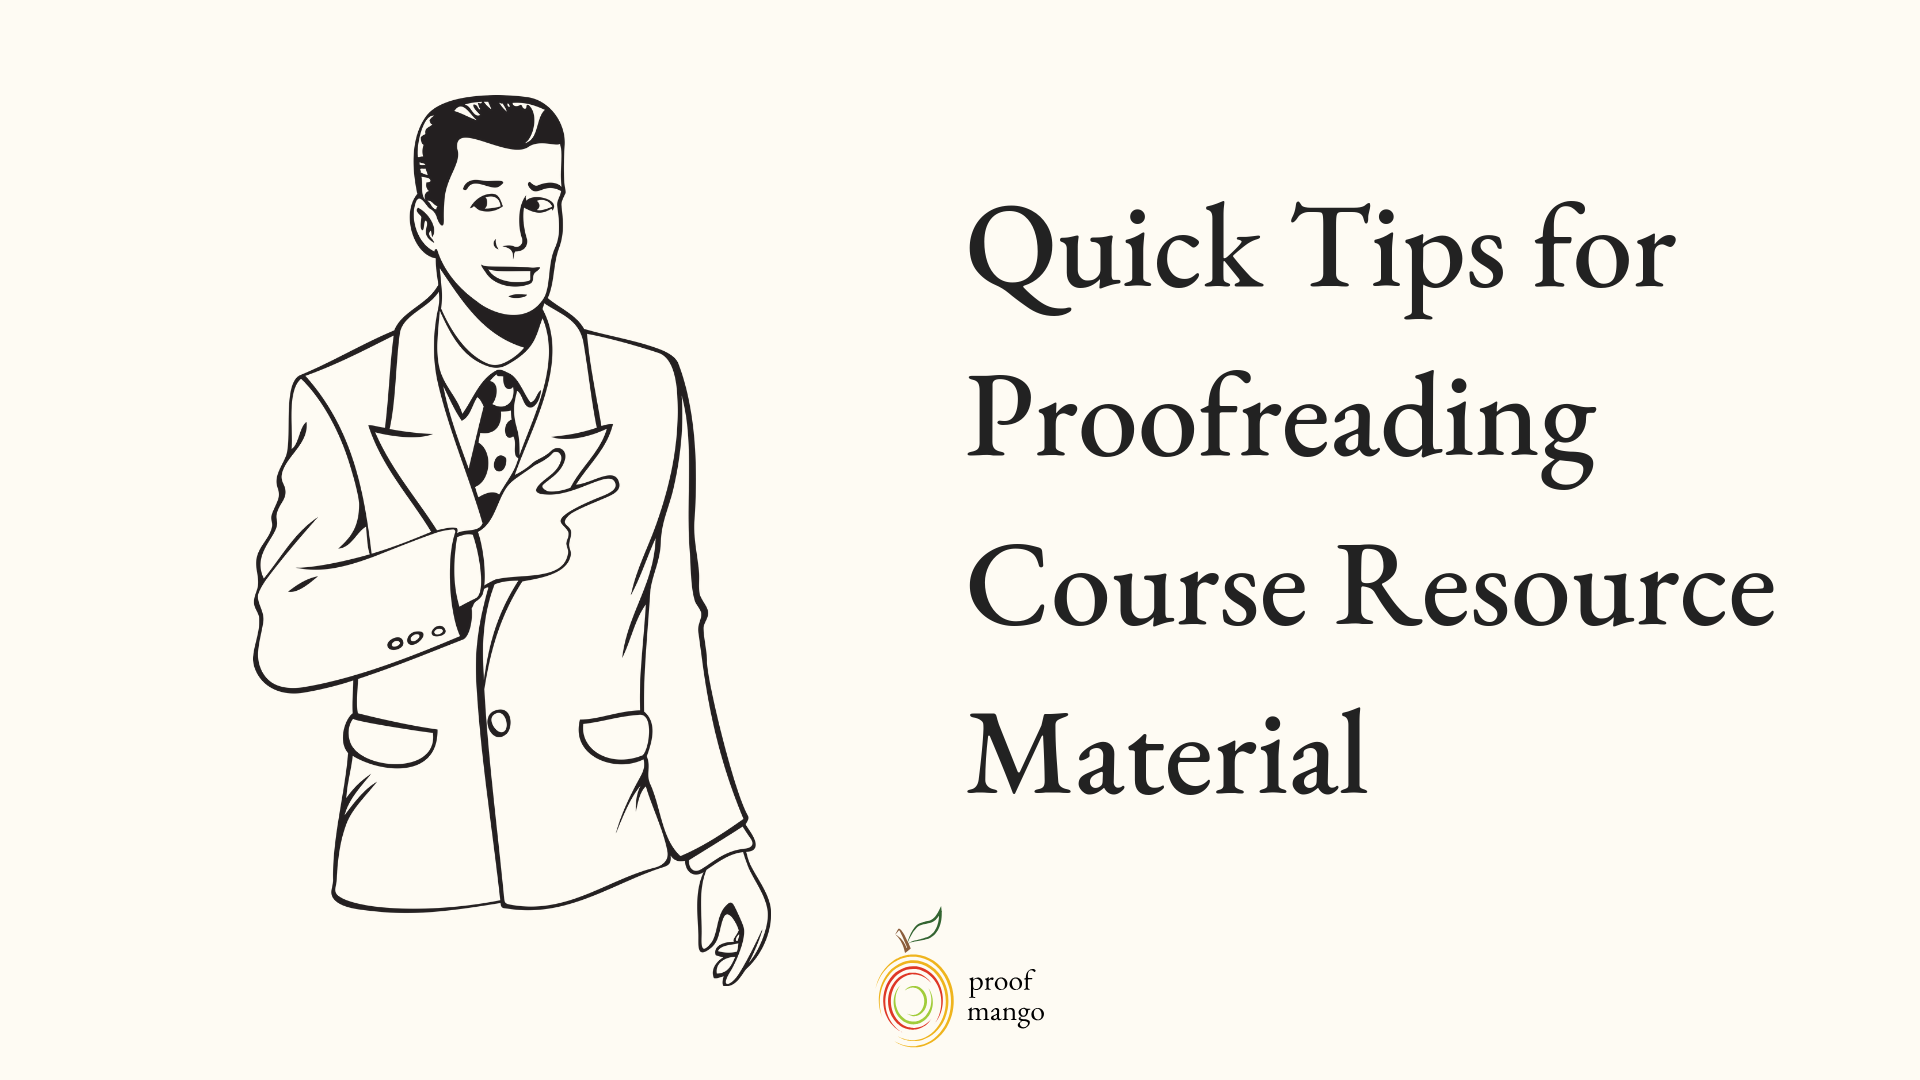 Quick-Tips-for-Proofreading-Course-Resource-Material